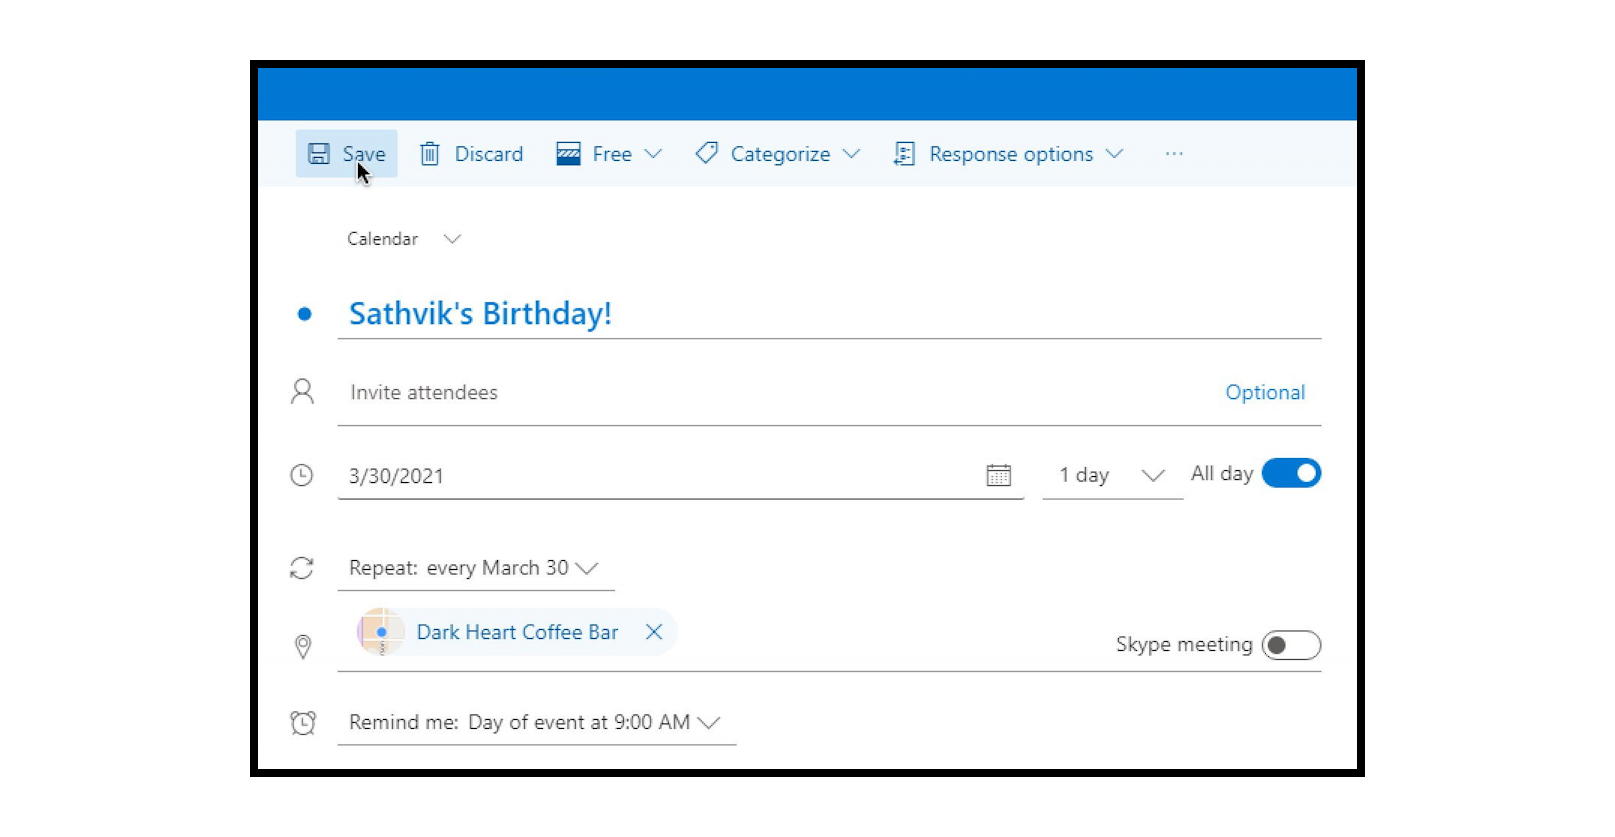 How Can I Add A Recurring Event in Outlook Calendar? Ask Dave Taylor